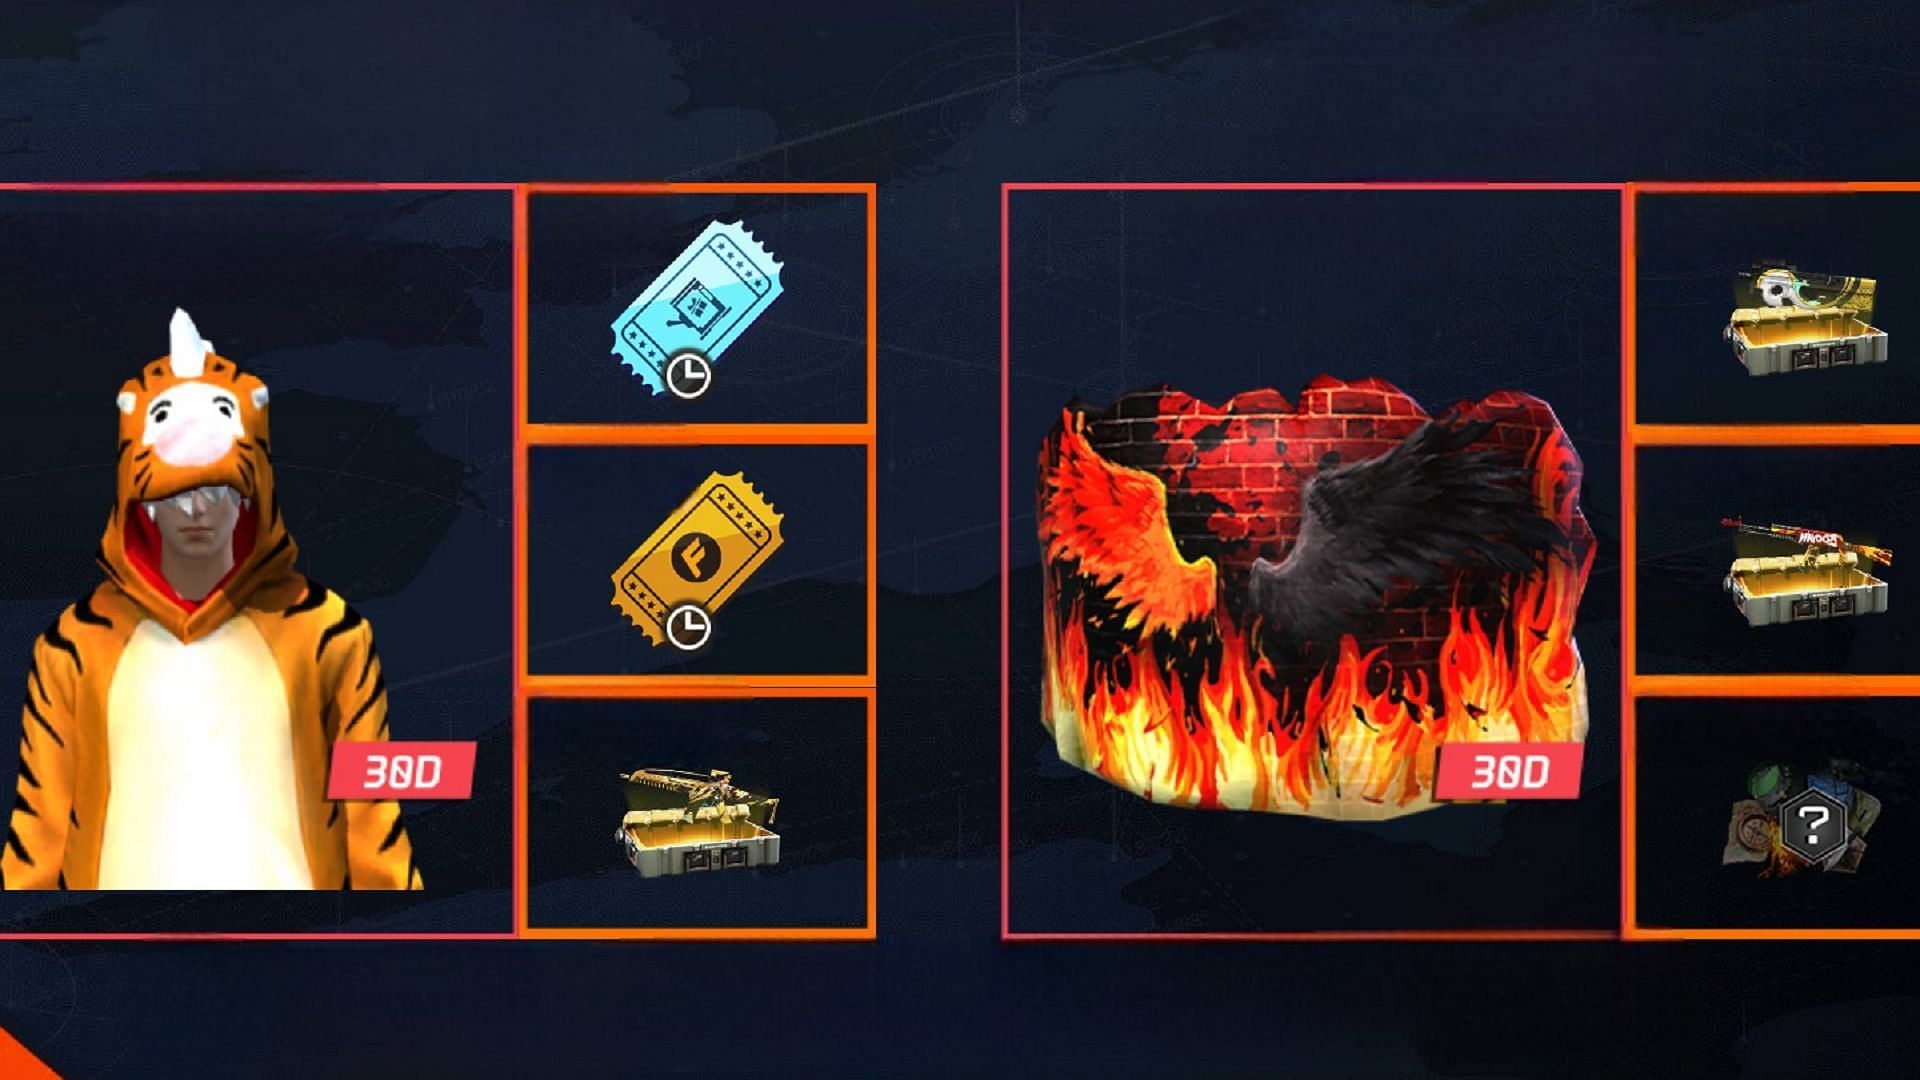 New State Wars event commences in Free Fire (Image via Garena)